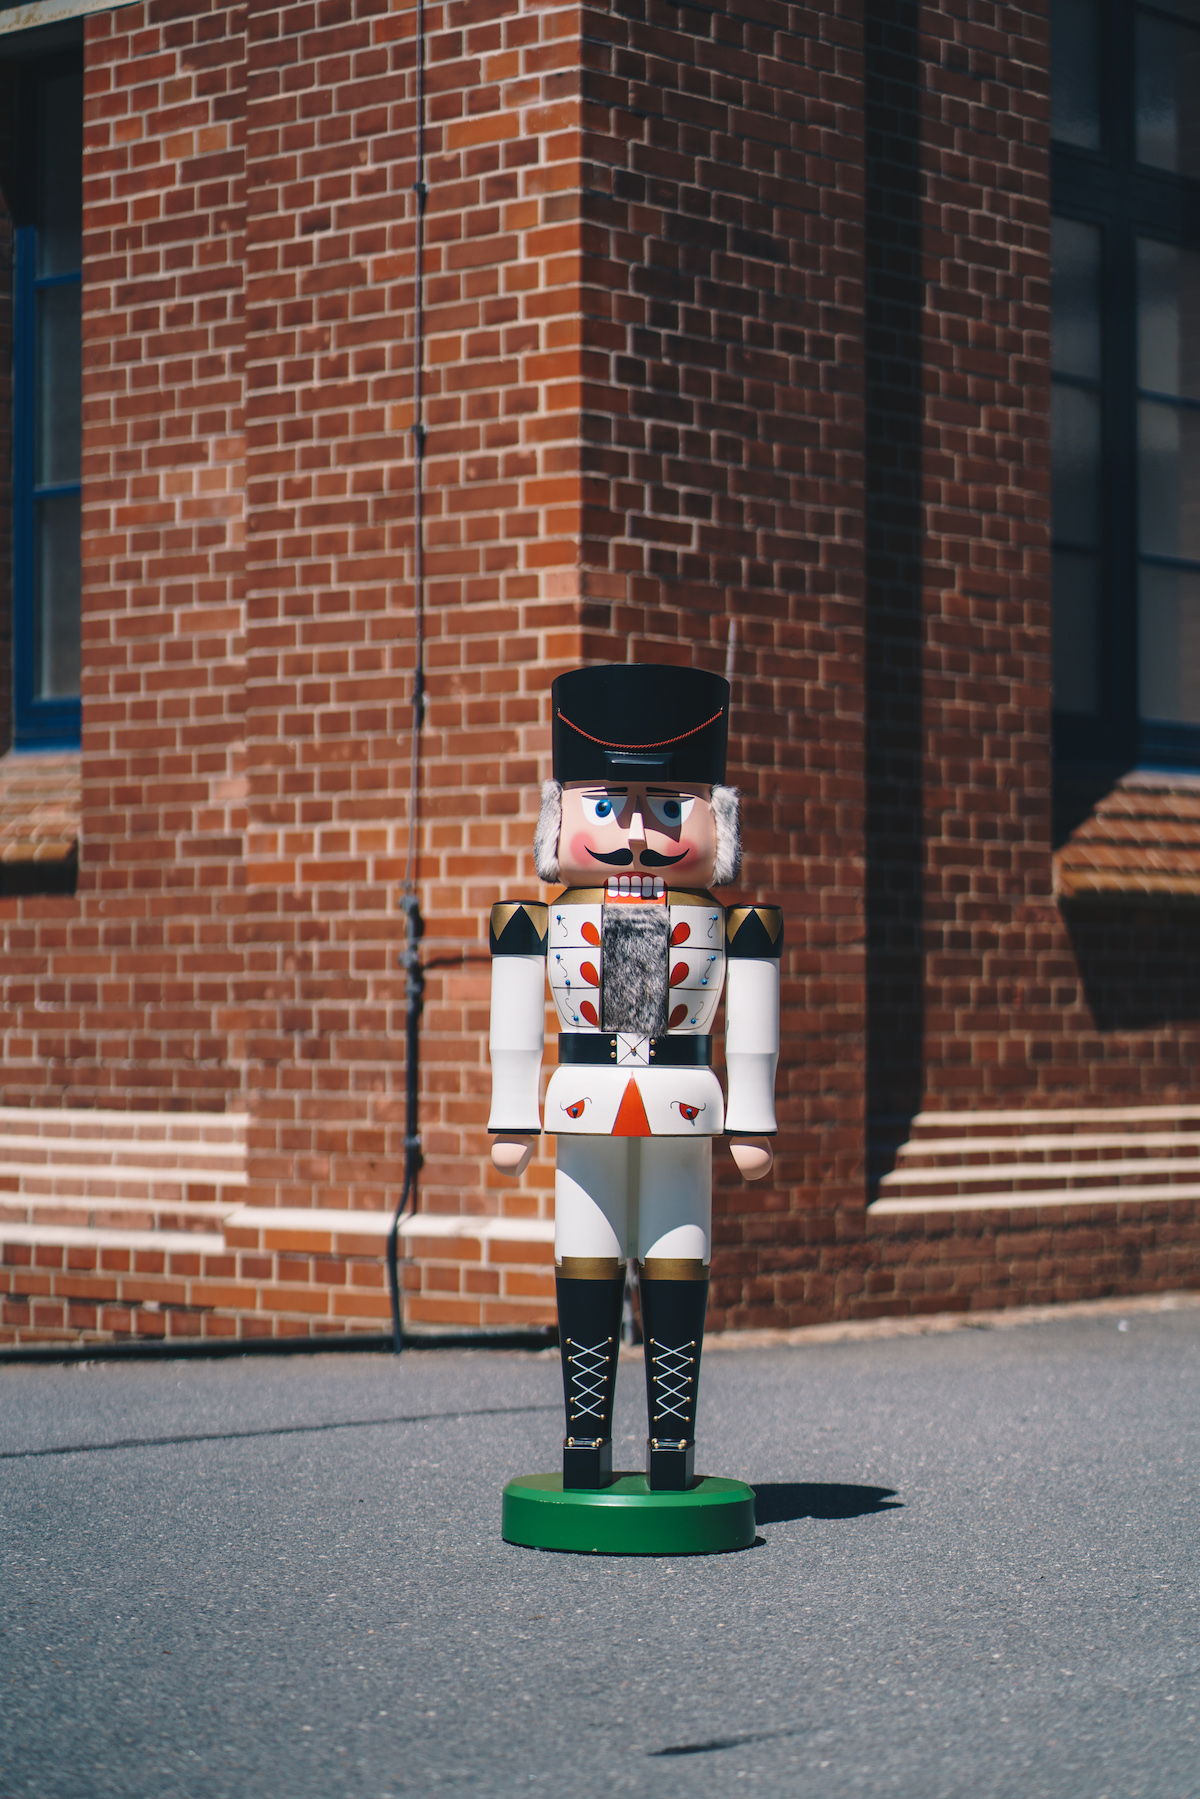 A red life-size nutcracker made of wood stands in front of a wall made of bricks.